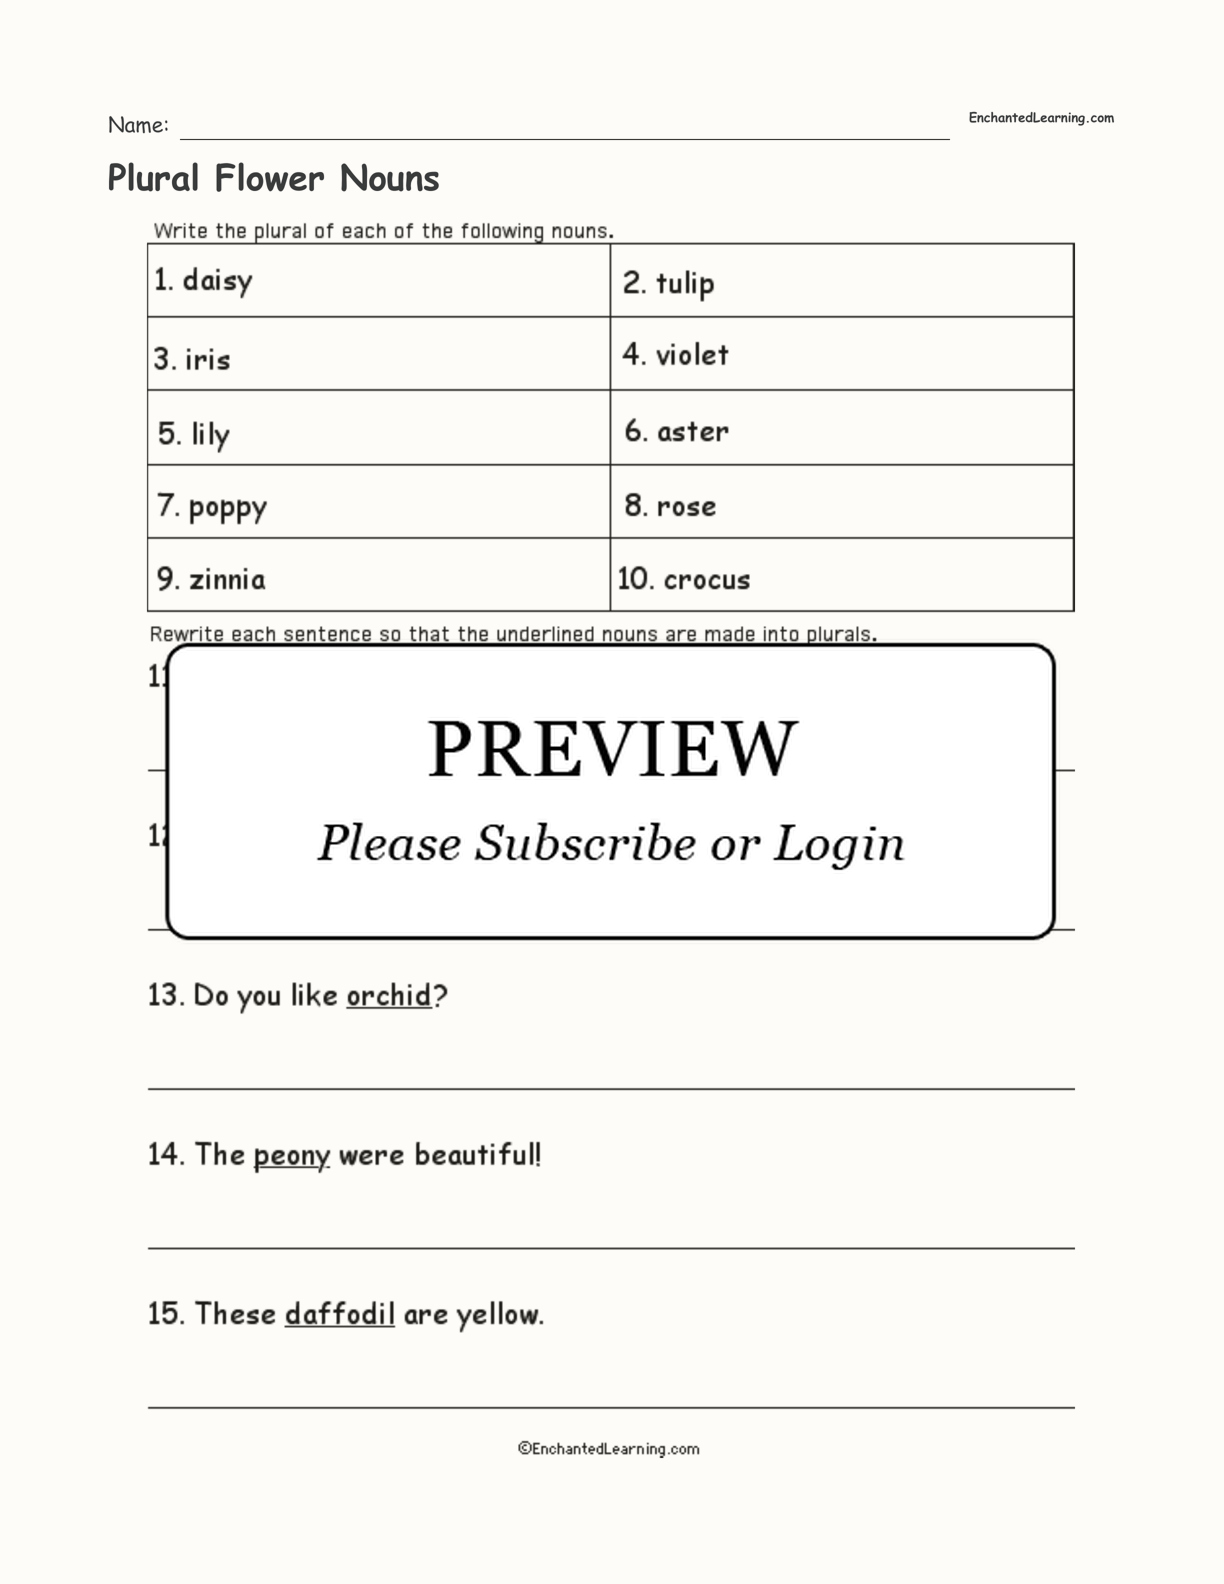 Plural Flower Nouns interactive worksheet page 1